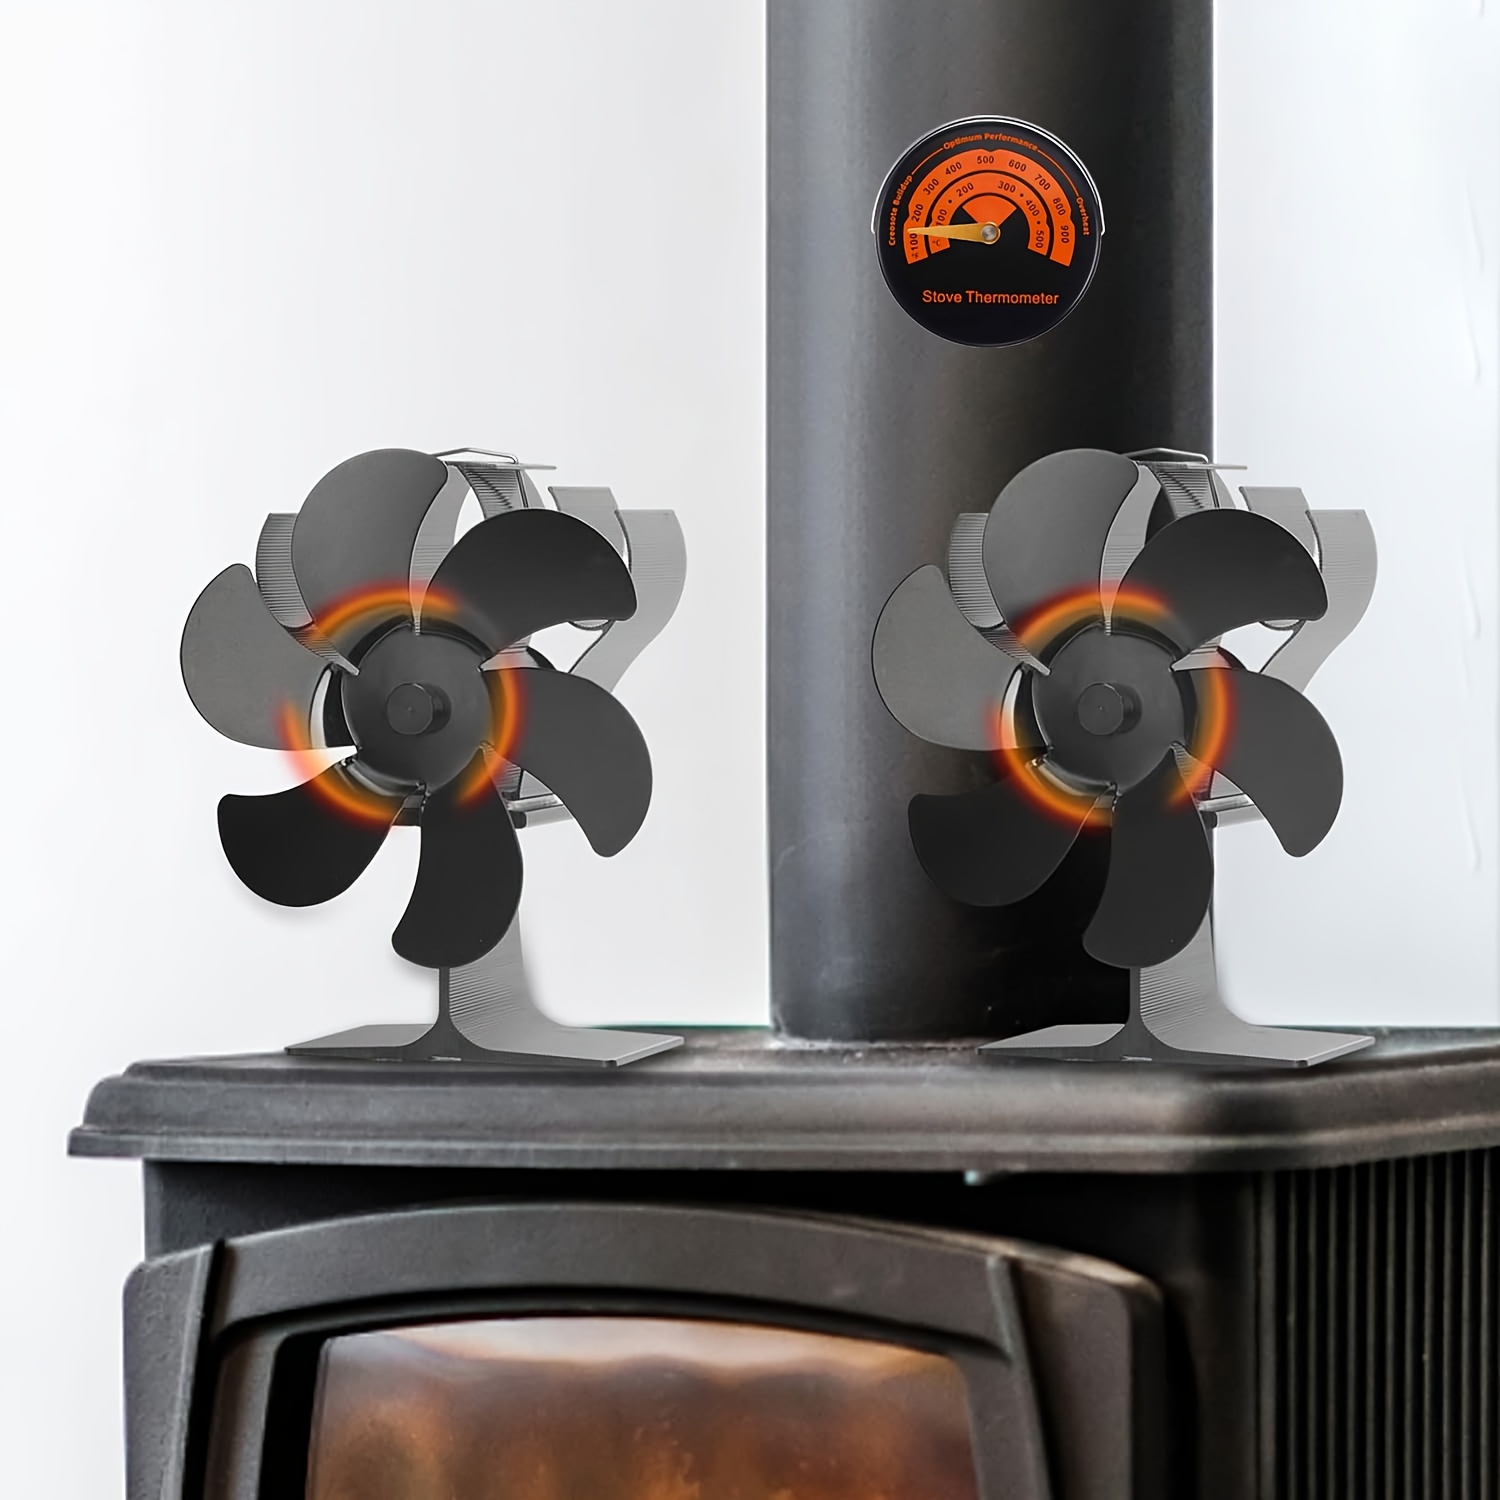 Thermoelectric Self Powered Stove Fan  Self Powered Stove Fan - Rockford  Chimney